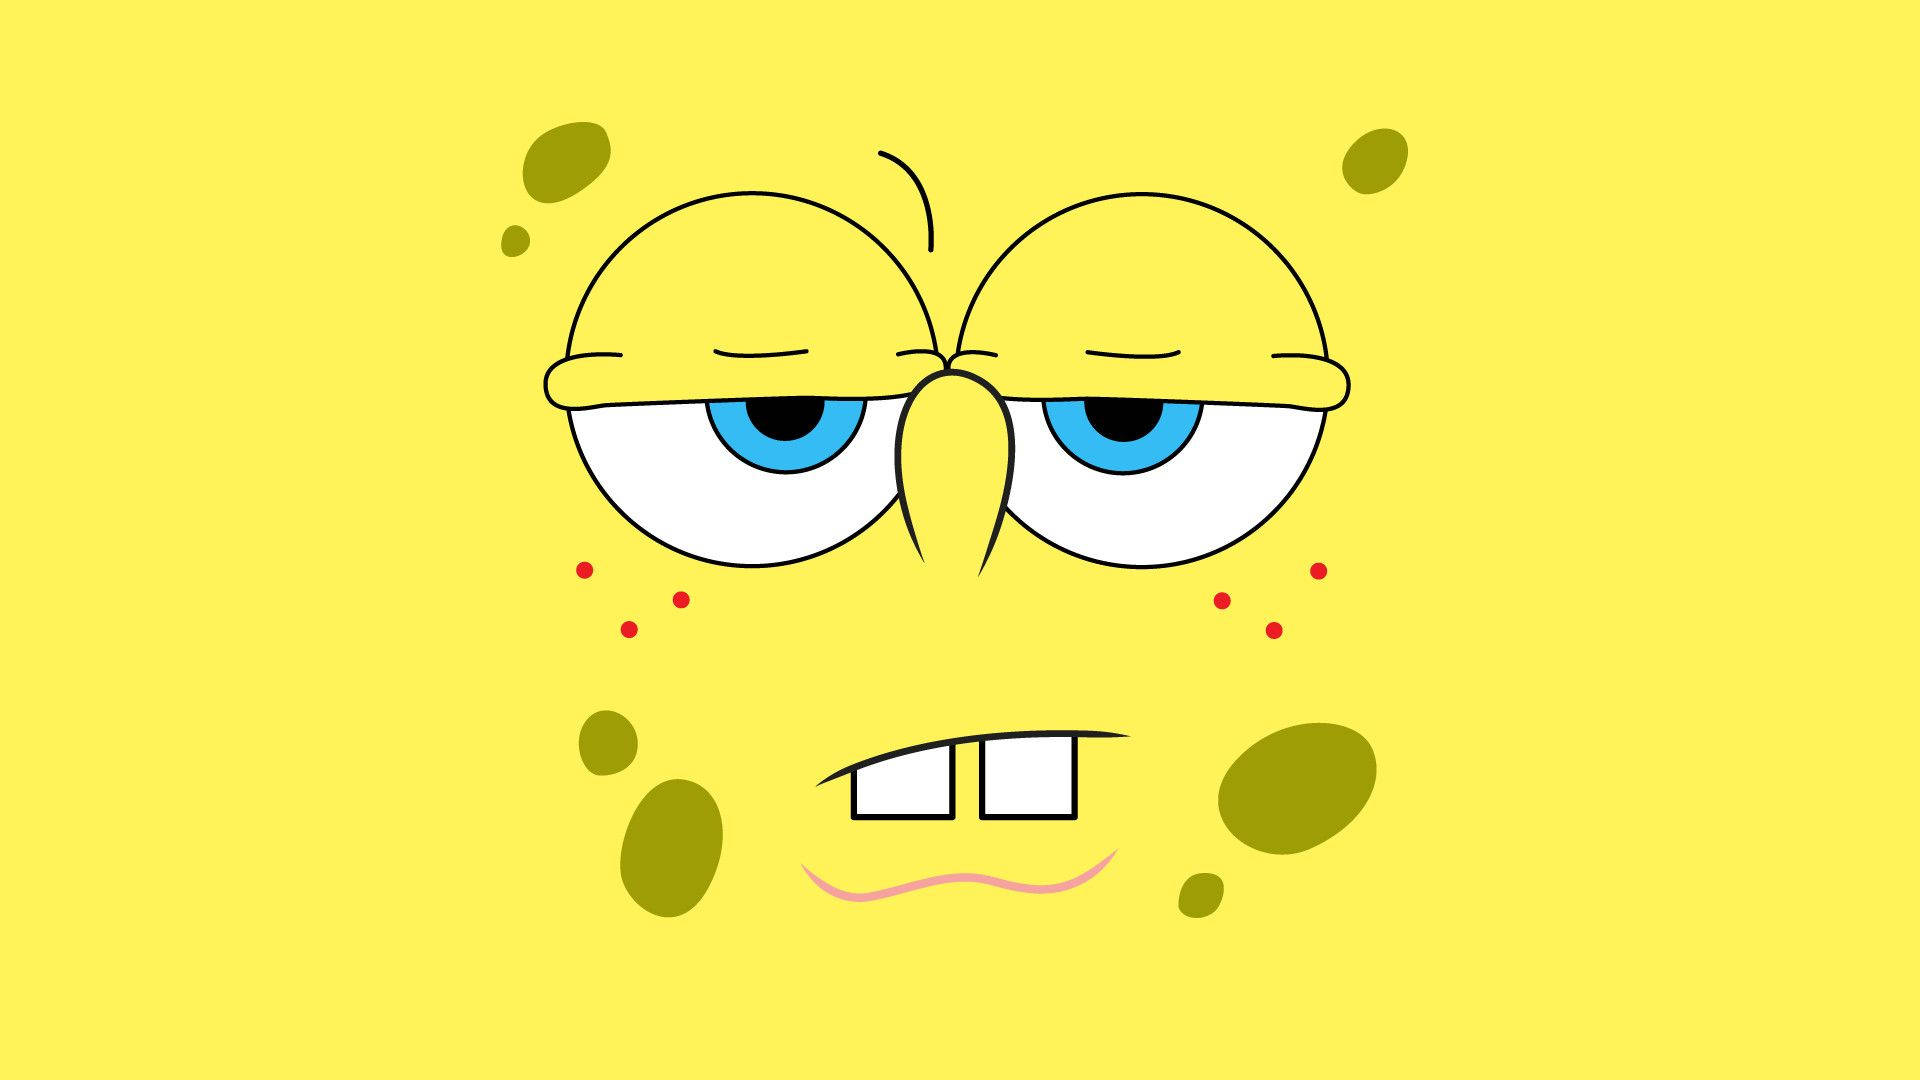 Cool Spongebob Is Here To Make Your Day Even Brighter Background